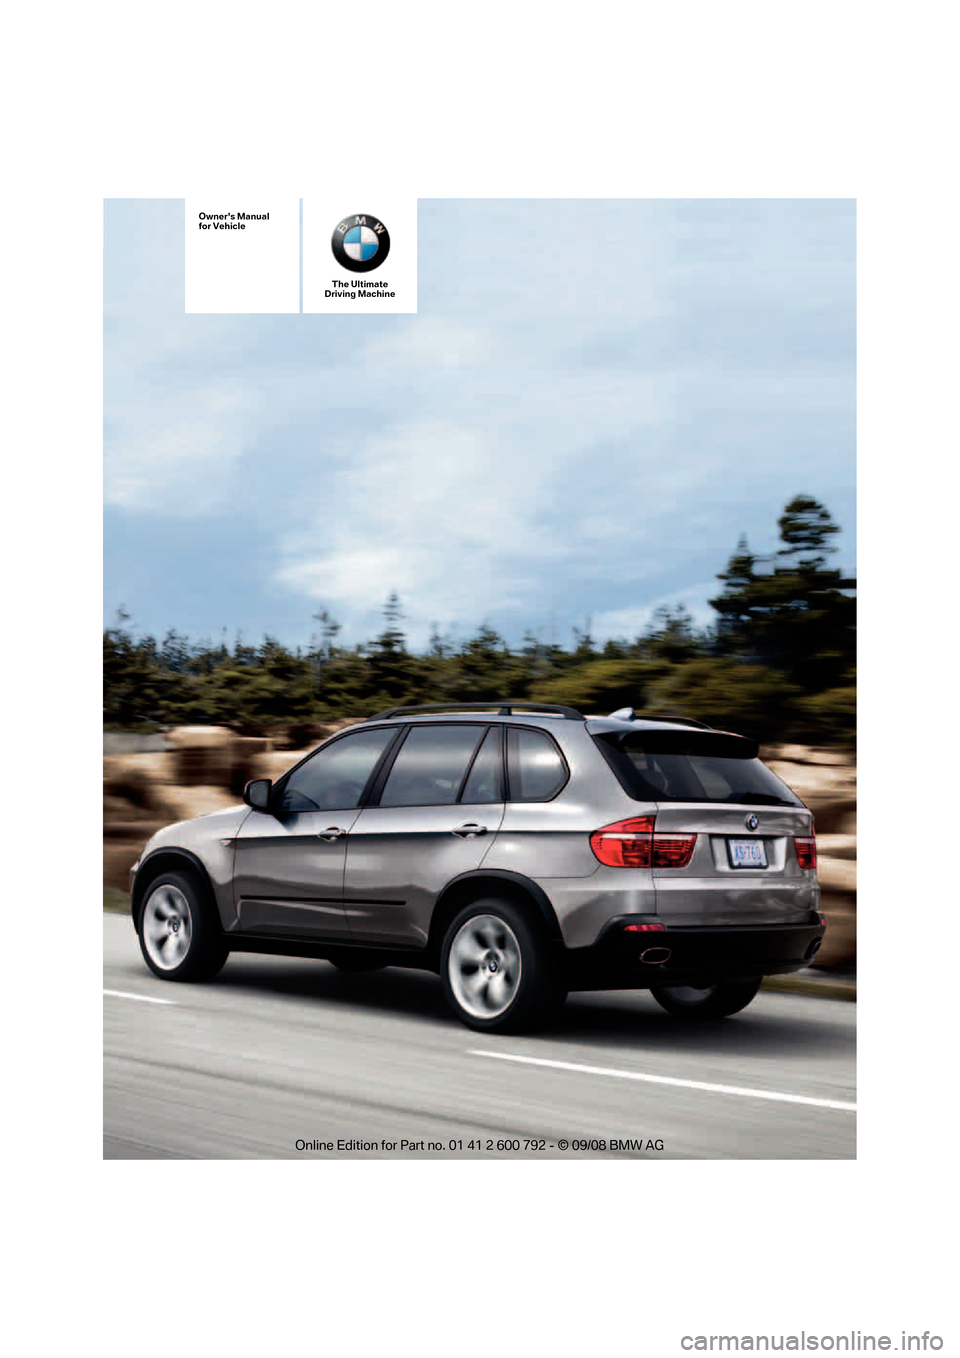 BMW X5M 2009 E70 Owners Manual The Ultimate
Driving Machine
Owners Manual
for Vehicle 